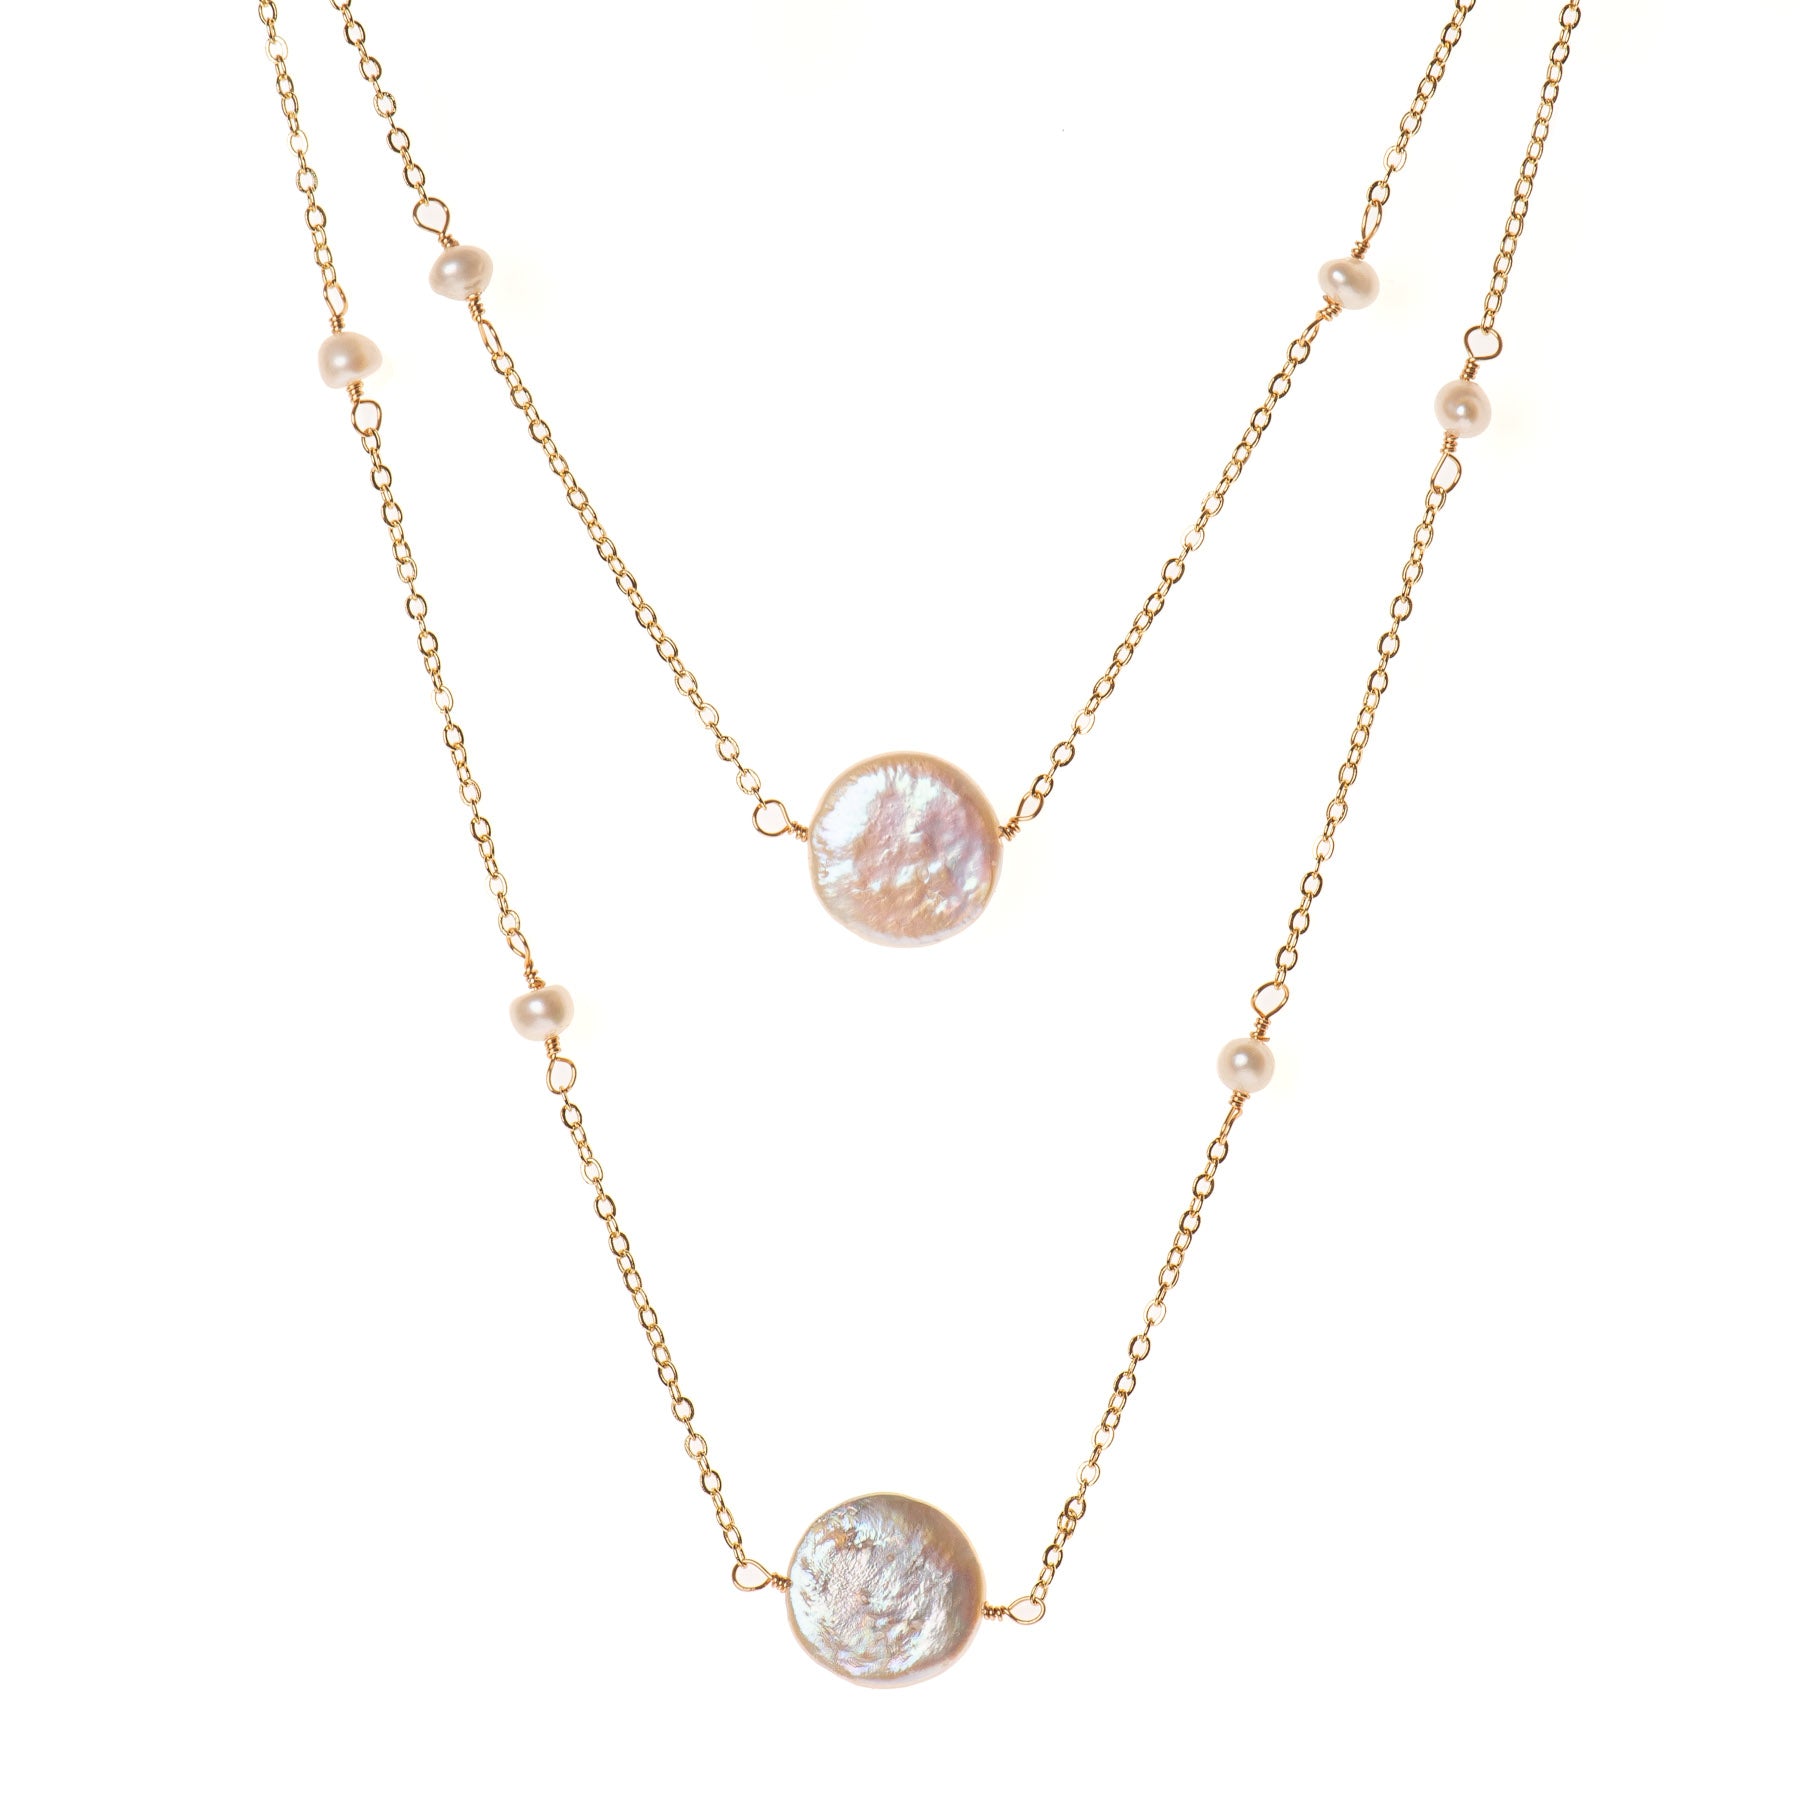 Alina Pearl Layered Chain Necklace Set